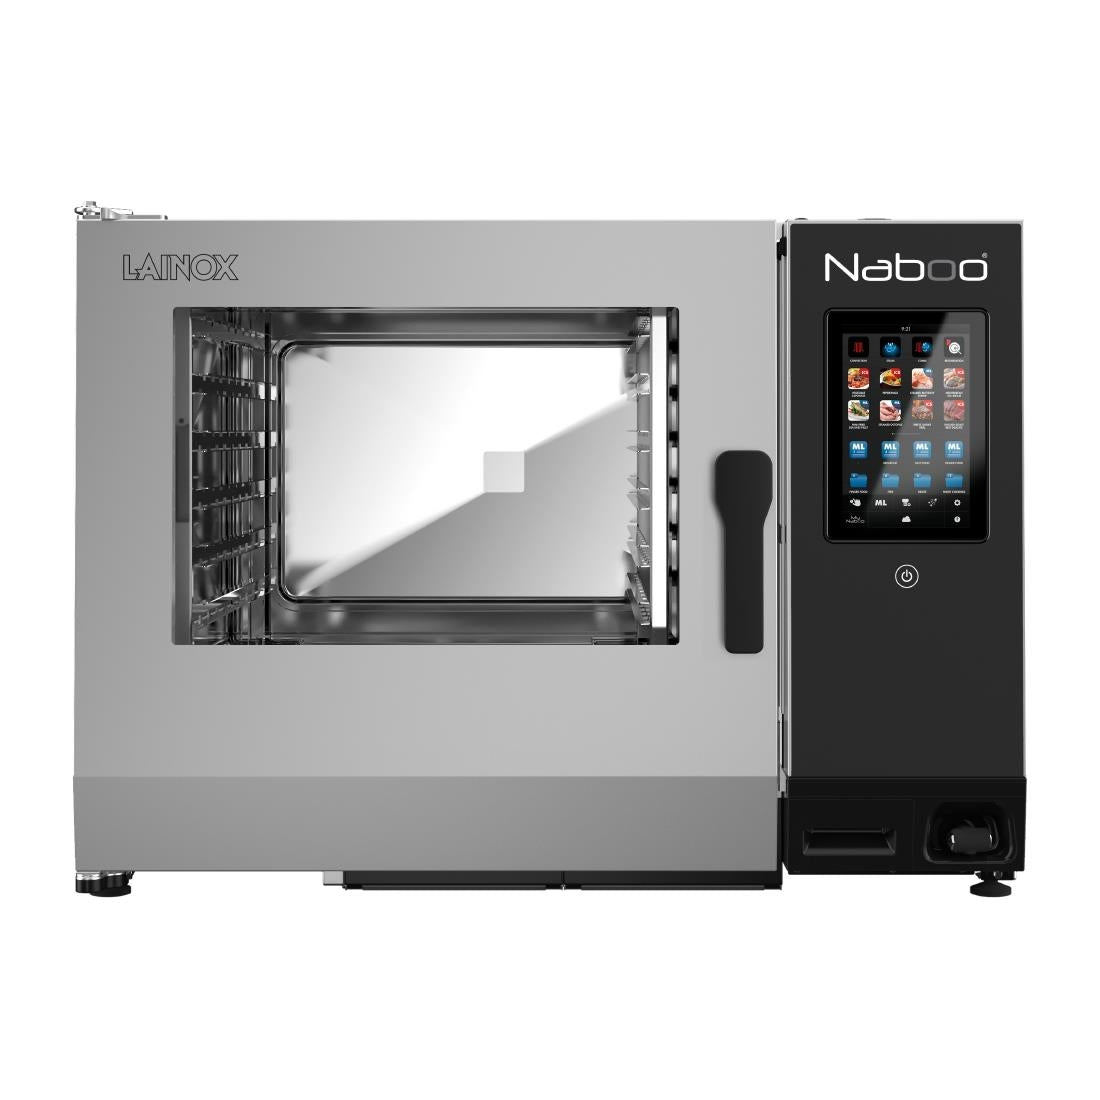 HP558 Lainox Naboo 6x2/1GN Electric Touch Screen Combi Oven NAE062BV JD Catering Equipment Solutions Ltd